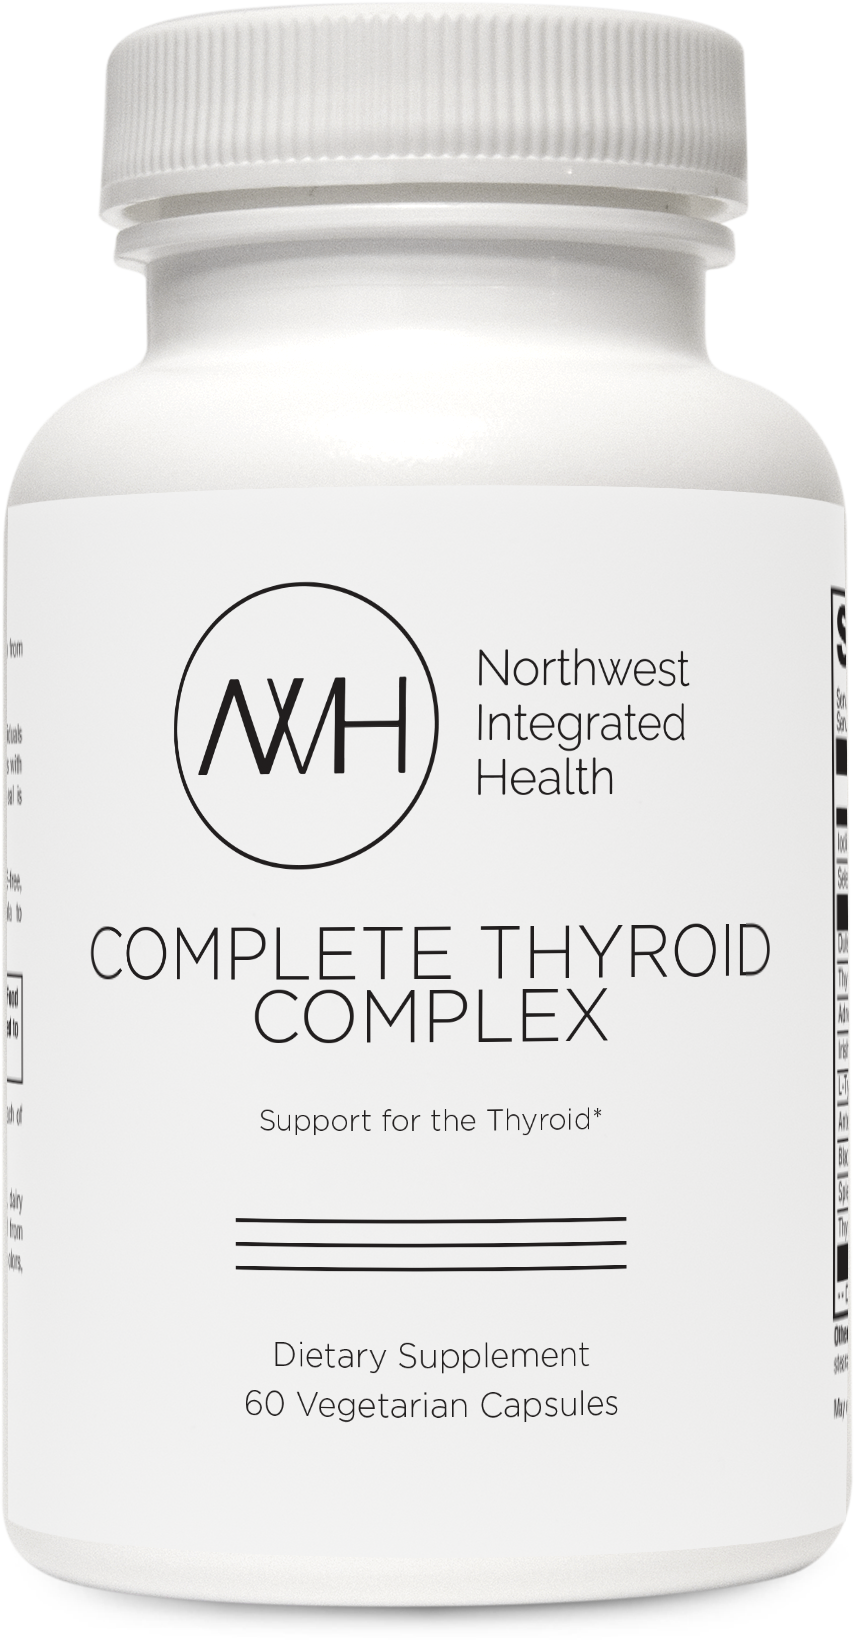 COMPLETE THYROID COMPLEX